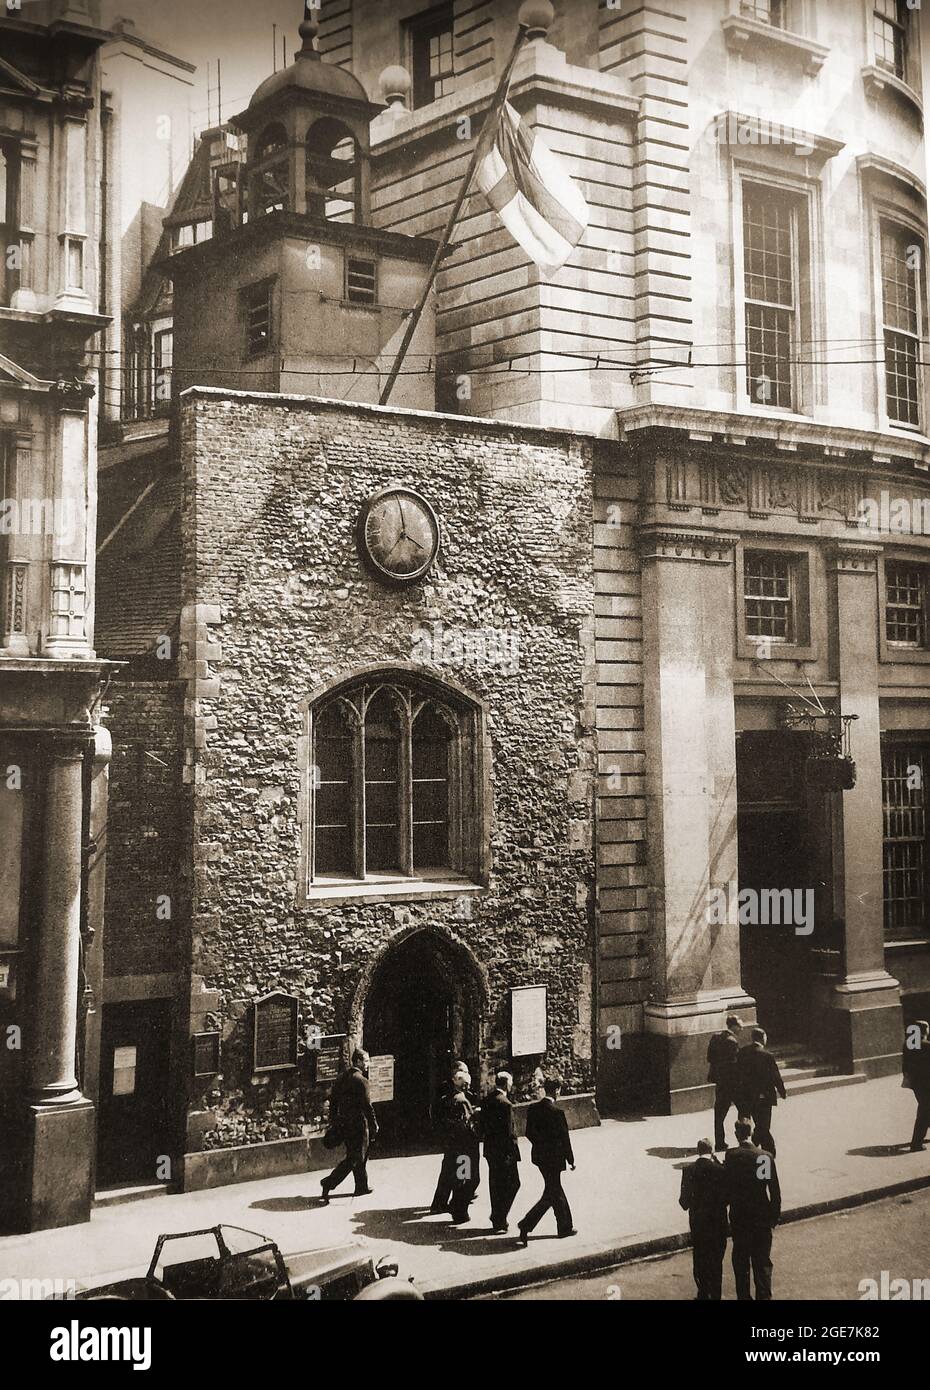 St Ethelburga's Church, Bishopgate, London, UK as it was in the late 1940's before restoration to its present form. Fully known as St Ethelburga-the-Virgin within Bishopsgate. It was bombed by the IRA (Irish Republican Army)  & has since been restored. It survived the Great Fire of London (1666 ) & is is dedicated to St Ethelburga (Adelburga ) 7th-century abbess of Barking Abbey. it has undergone a number of changes including rebuilding in the 15th century & the addition of a small square bell turret in 1775, a weathervane  in 1671 and a wooden front porch containing 2 shops (pulled down1938). Stock Photo